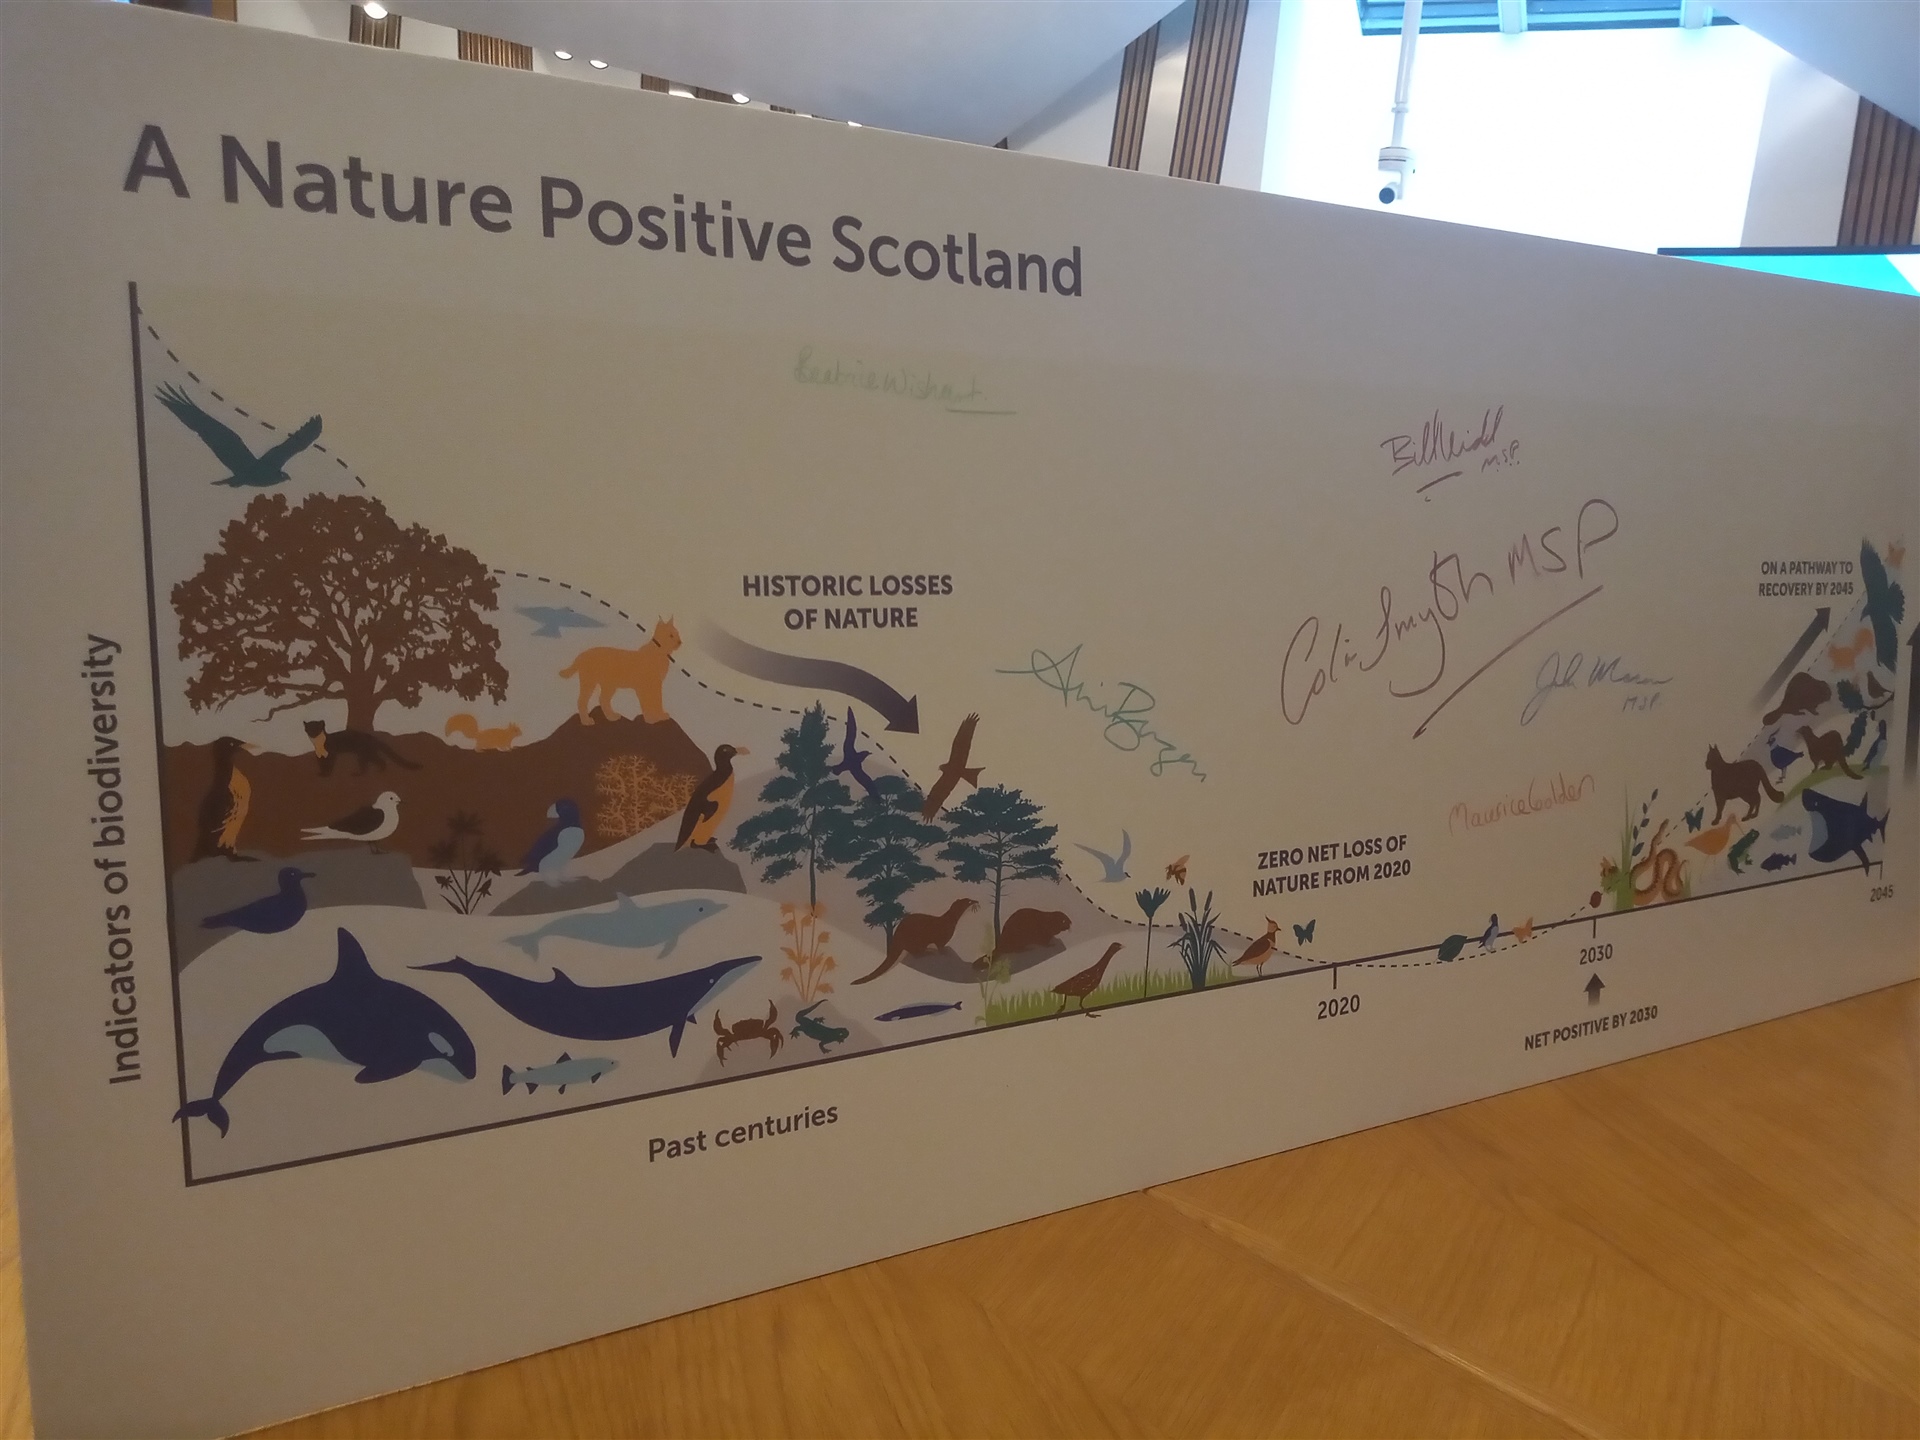  A large banner which reads, "A Nature Positive Scotland". It shows a graph of nature's decline over recent years and hoped increase in years to come.